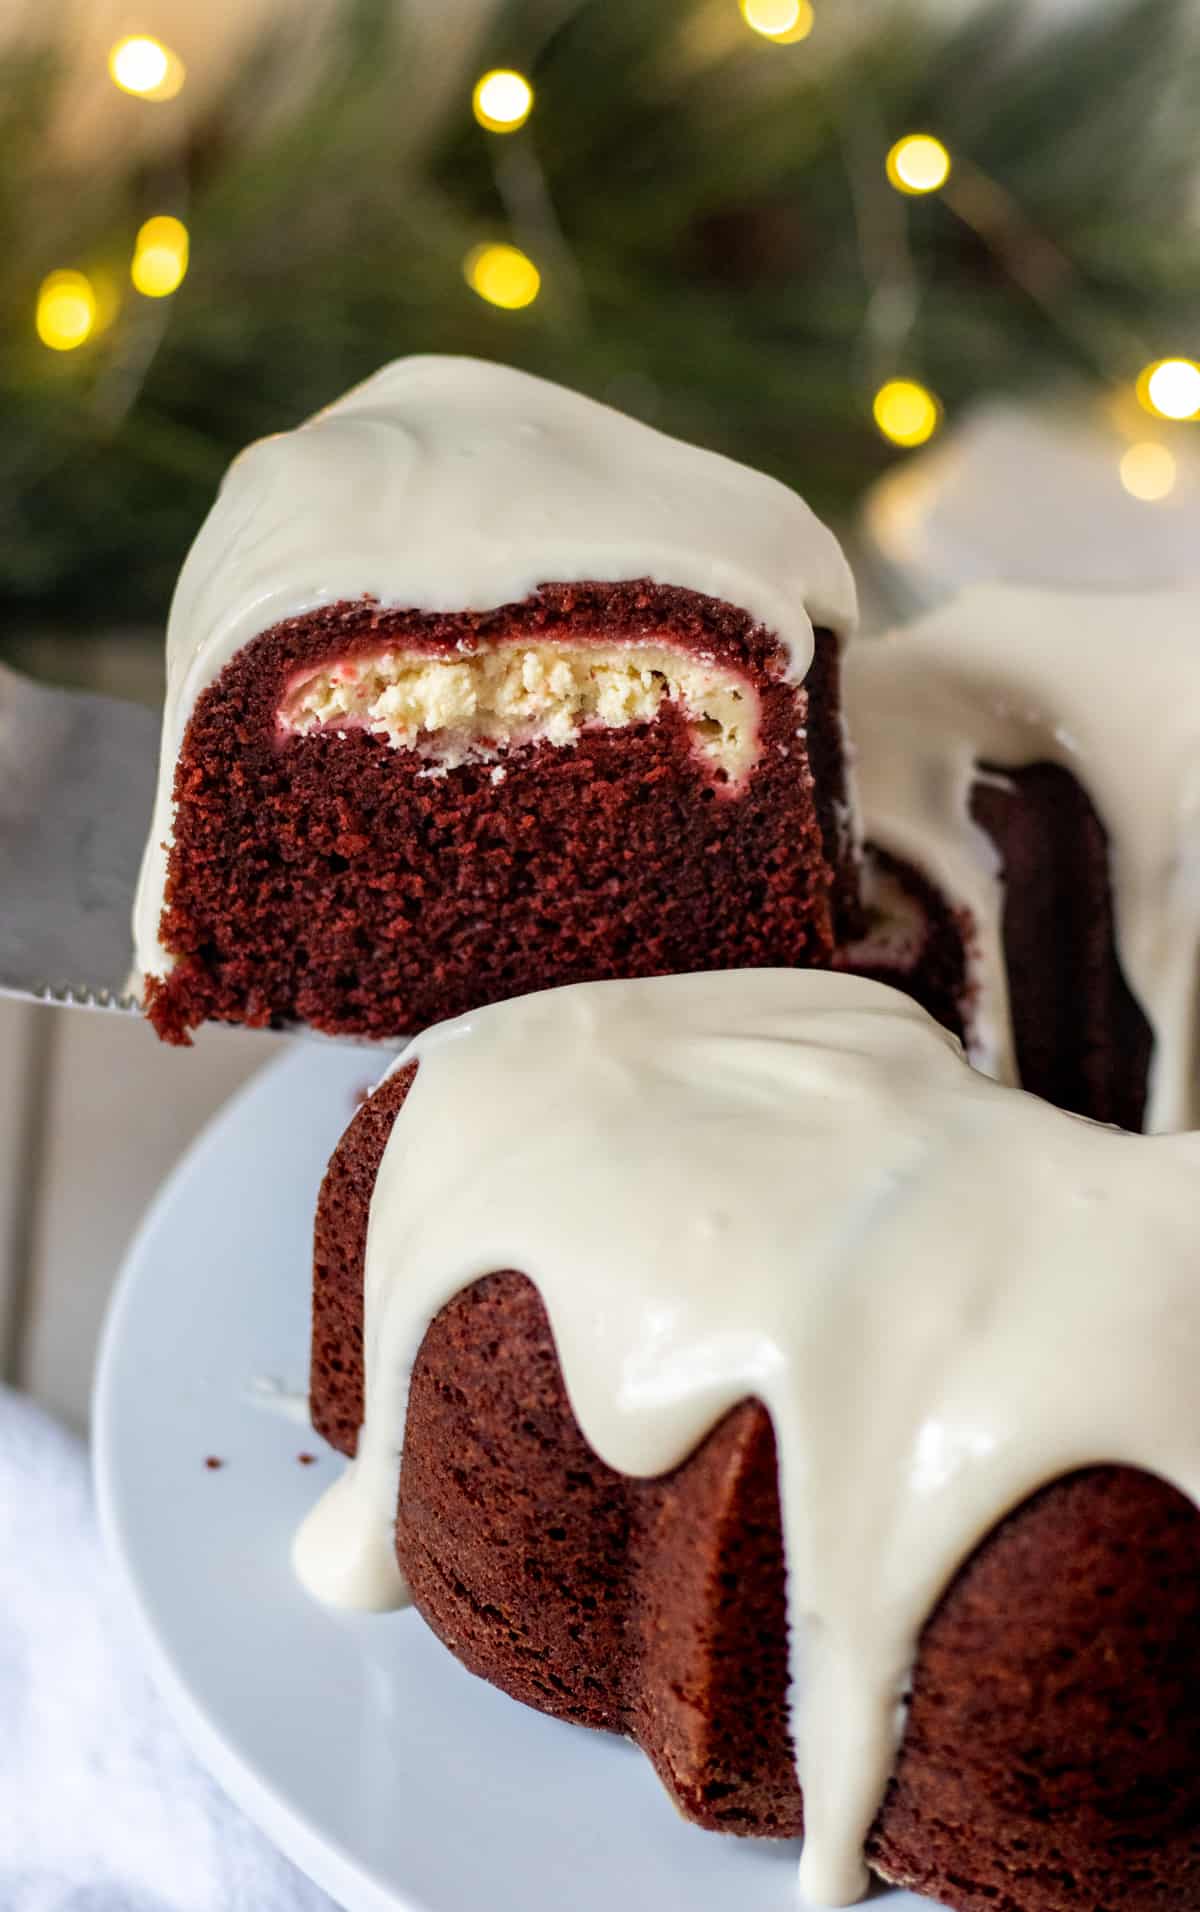 Slice of red velvet bundt cake pulled out of the rest of the cake.